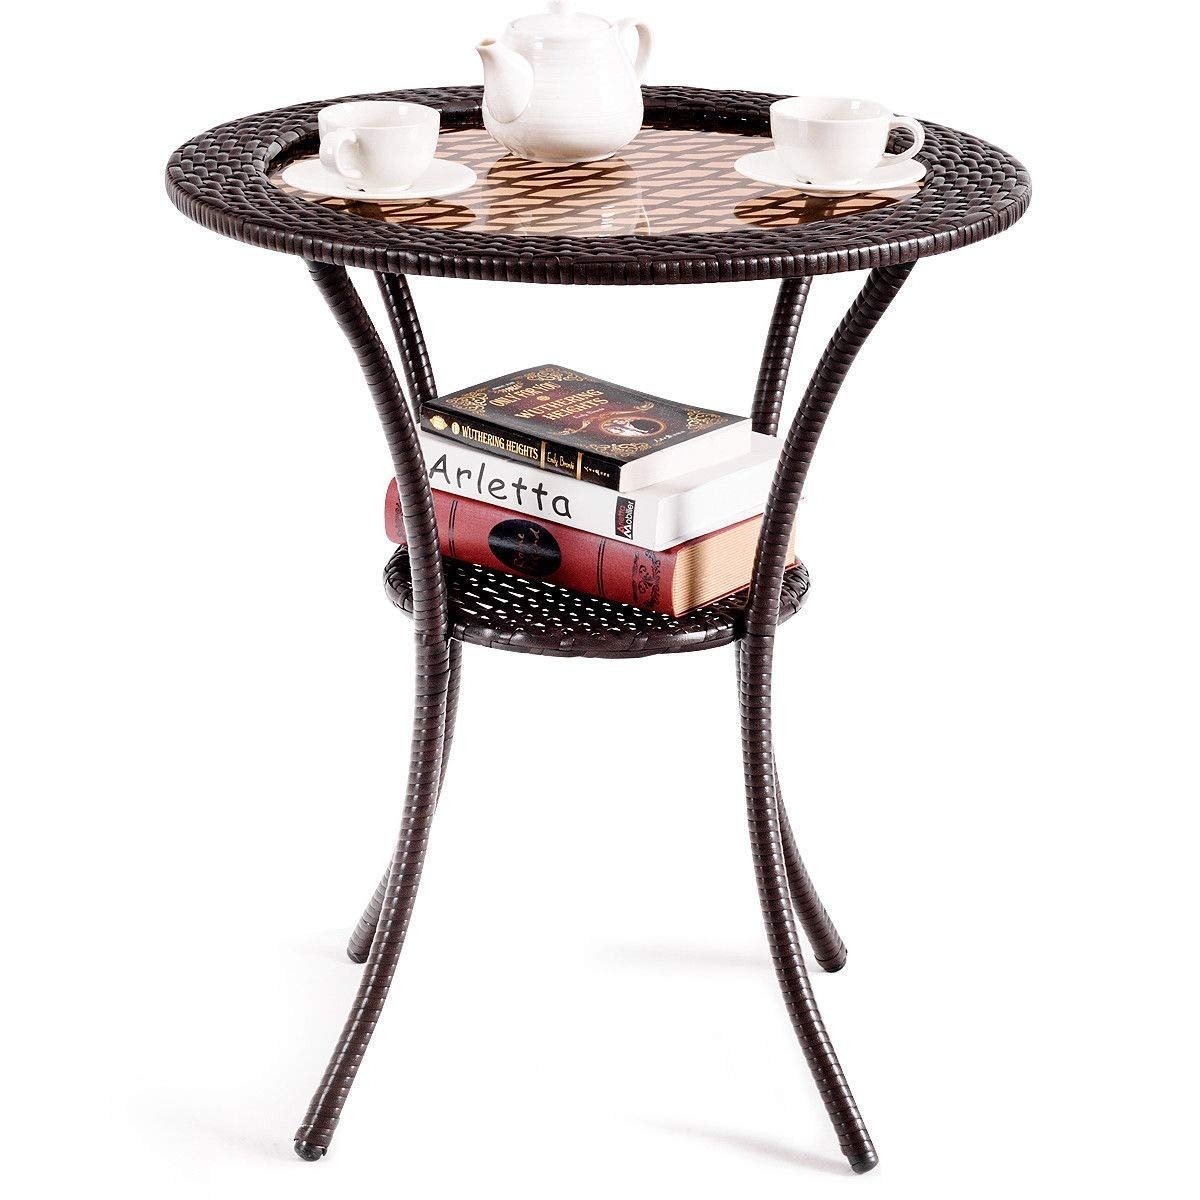 Round Rattan Wicker Coffee Table with Lower Shelf, Brown - Gallery Canada